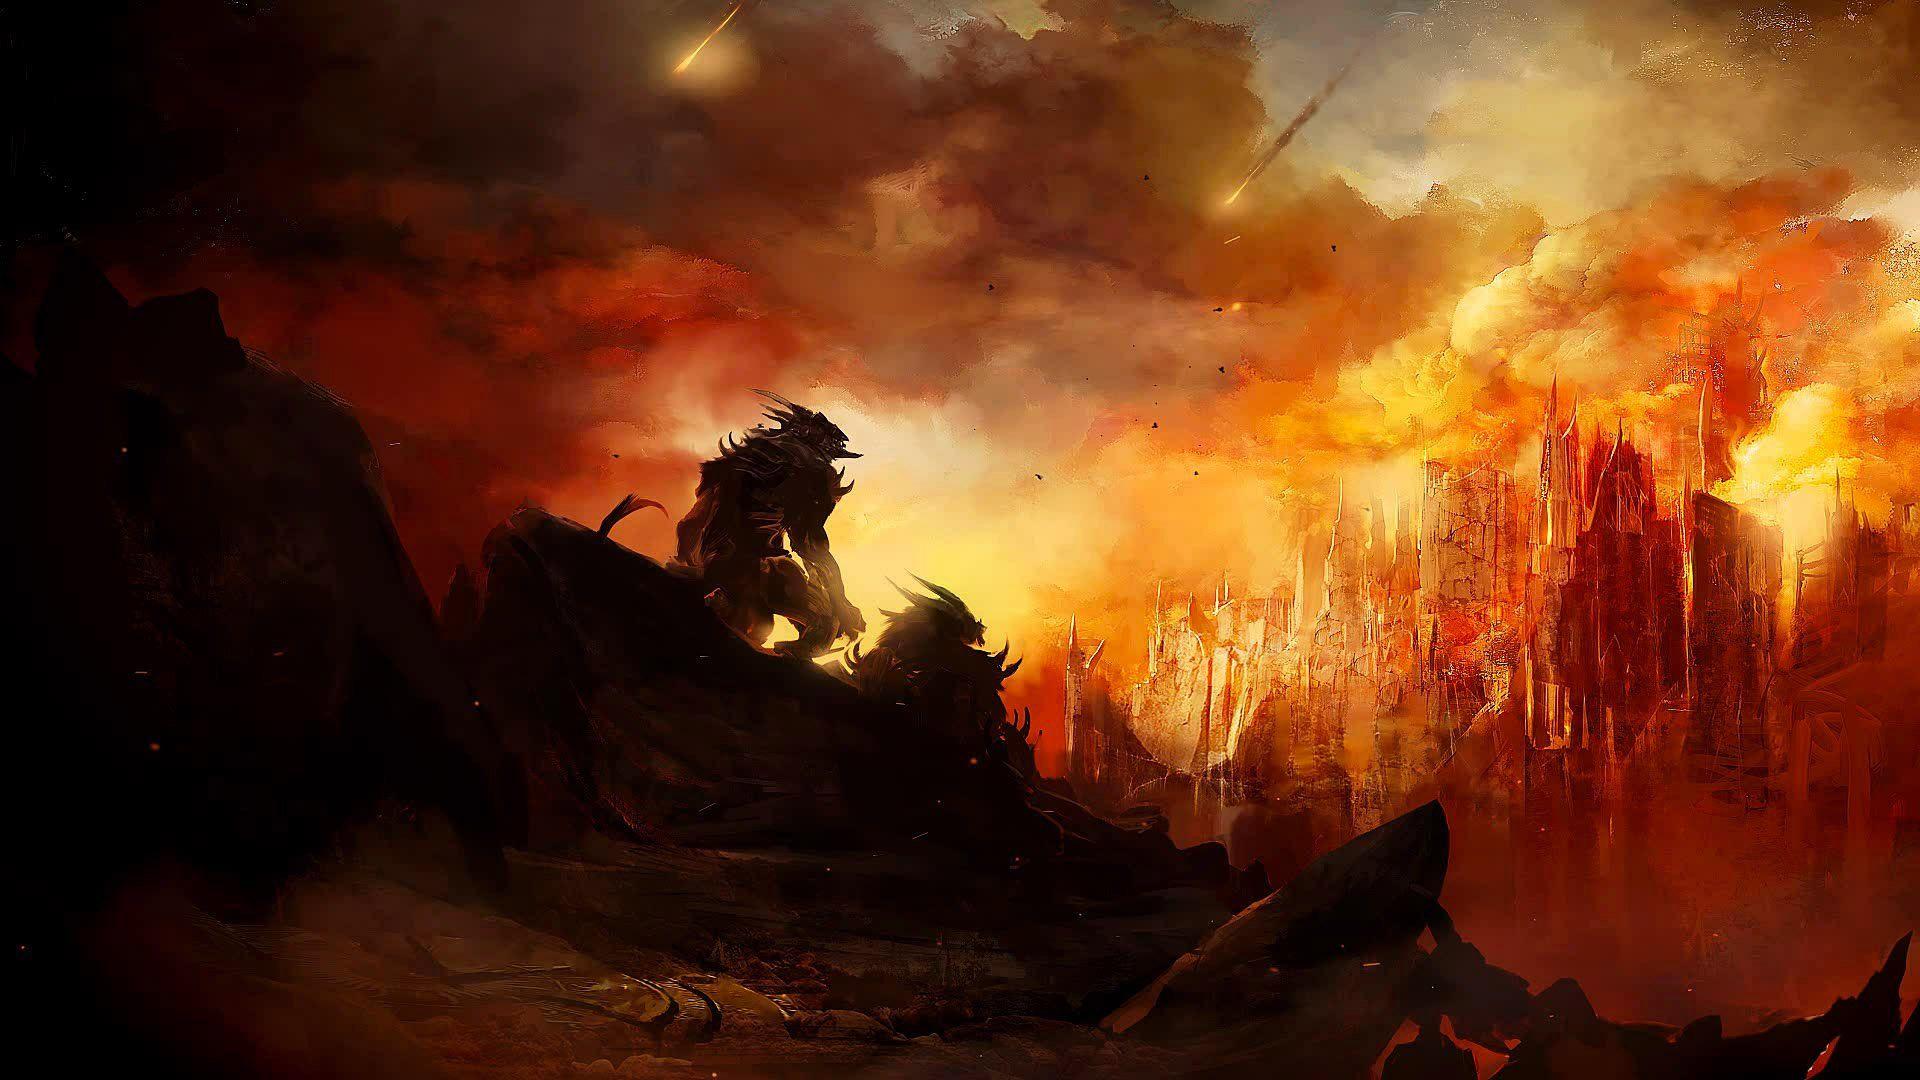 Guild Wars 2 Full HD Wallpaper and Background Imagex1080